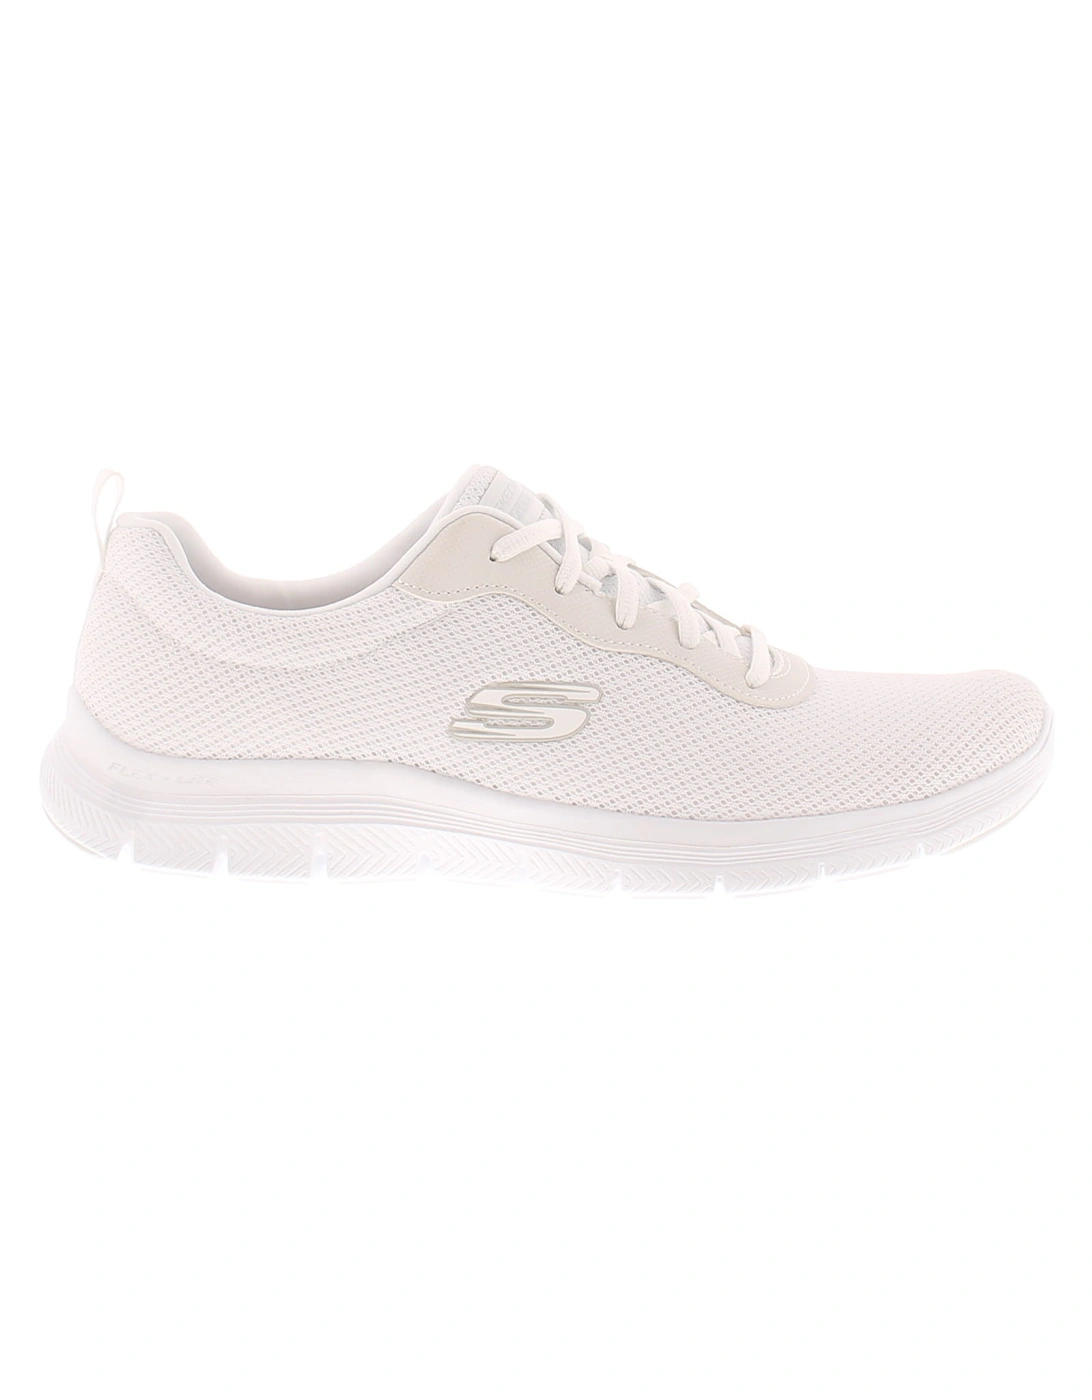 Womens Trainers Flex Appeal 4 0 Lace Up white UK Size